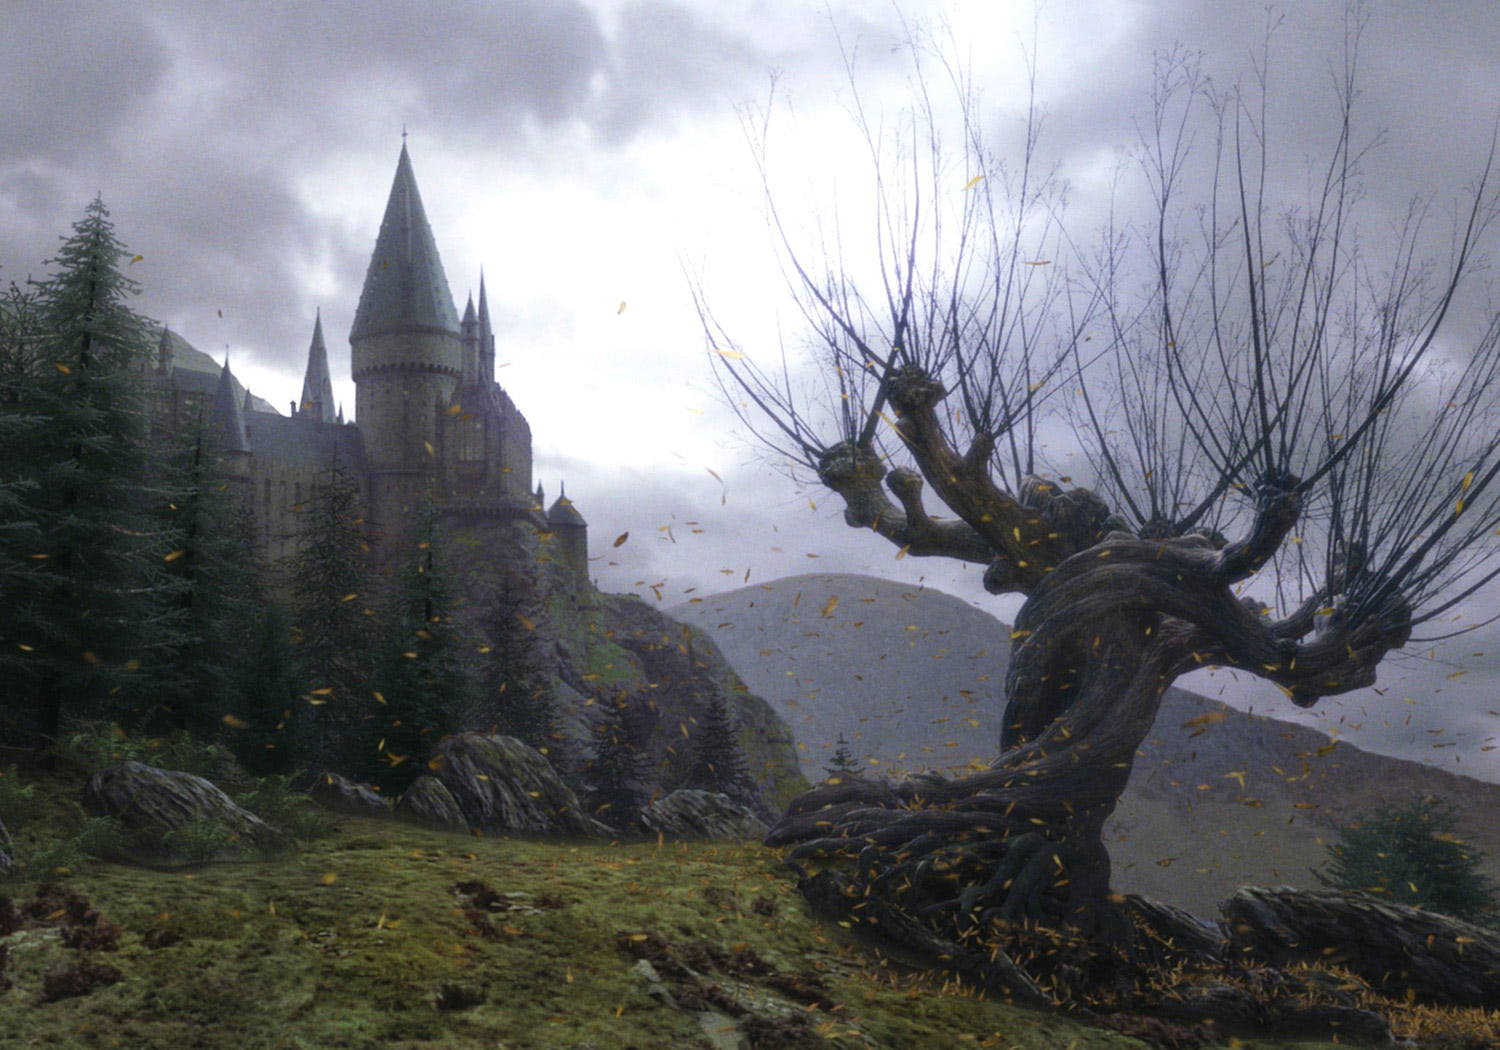 The Whomping Willow